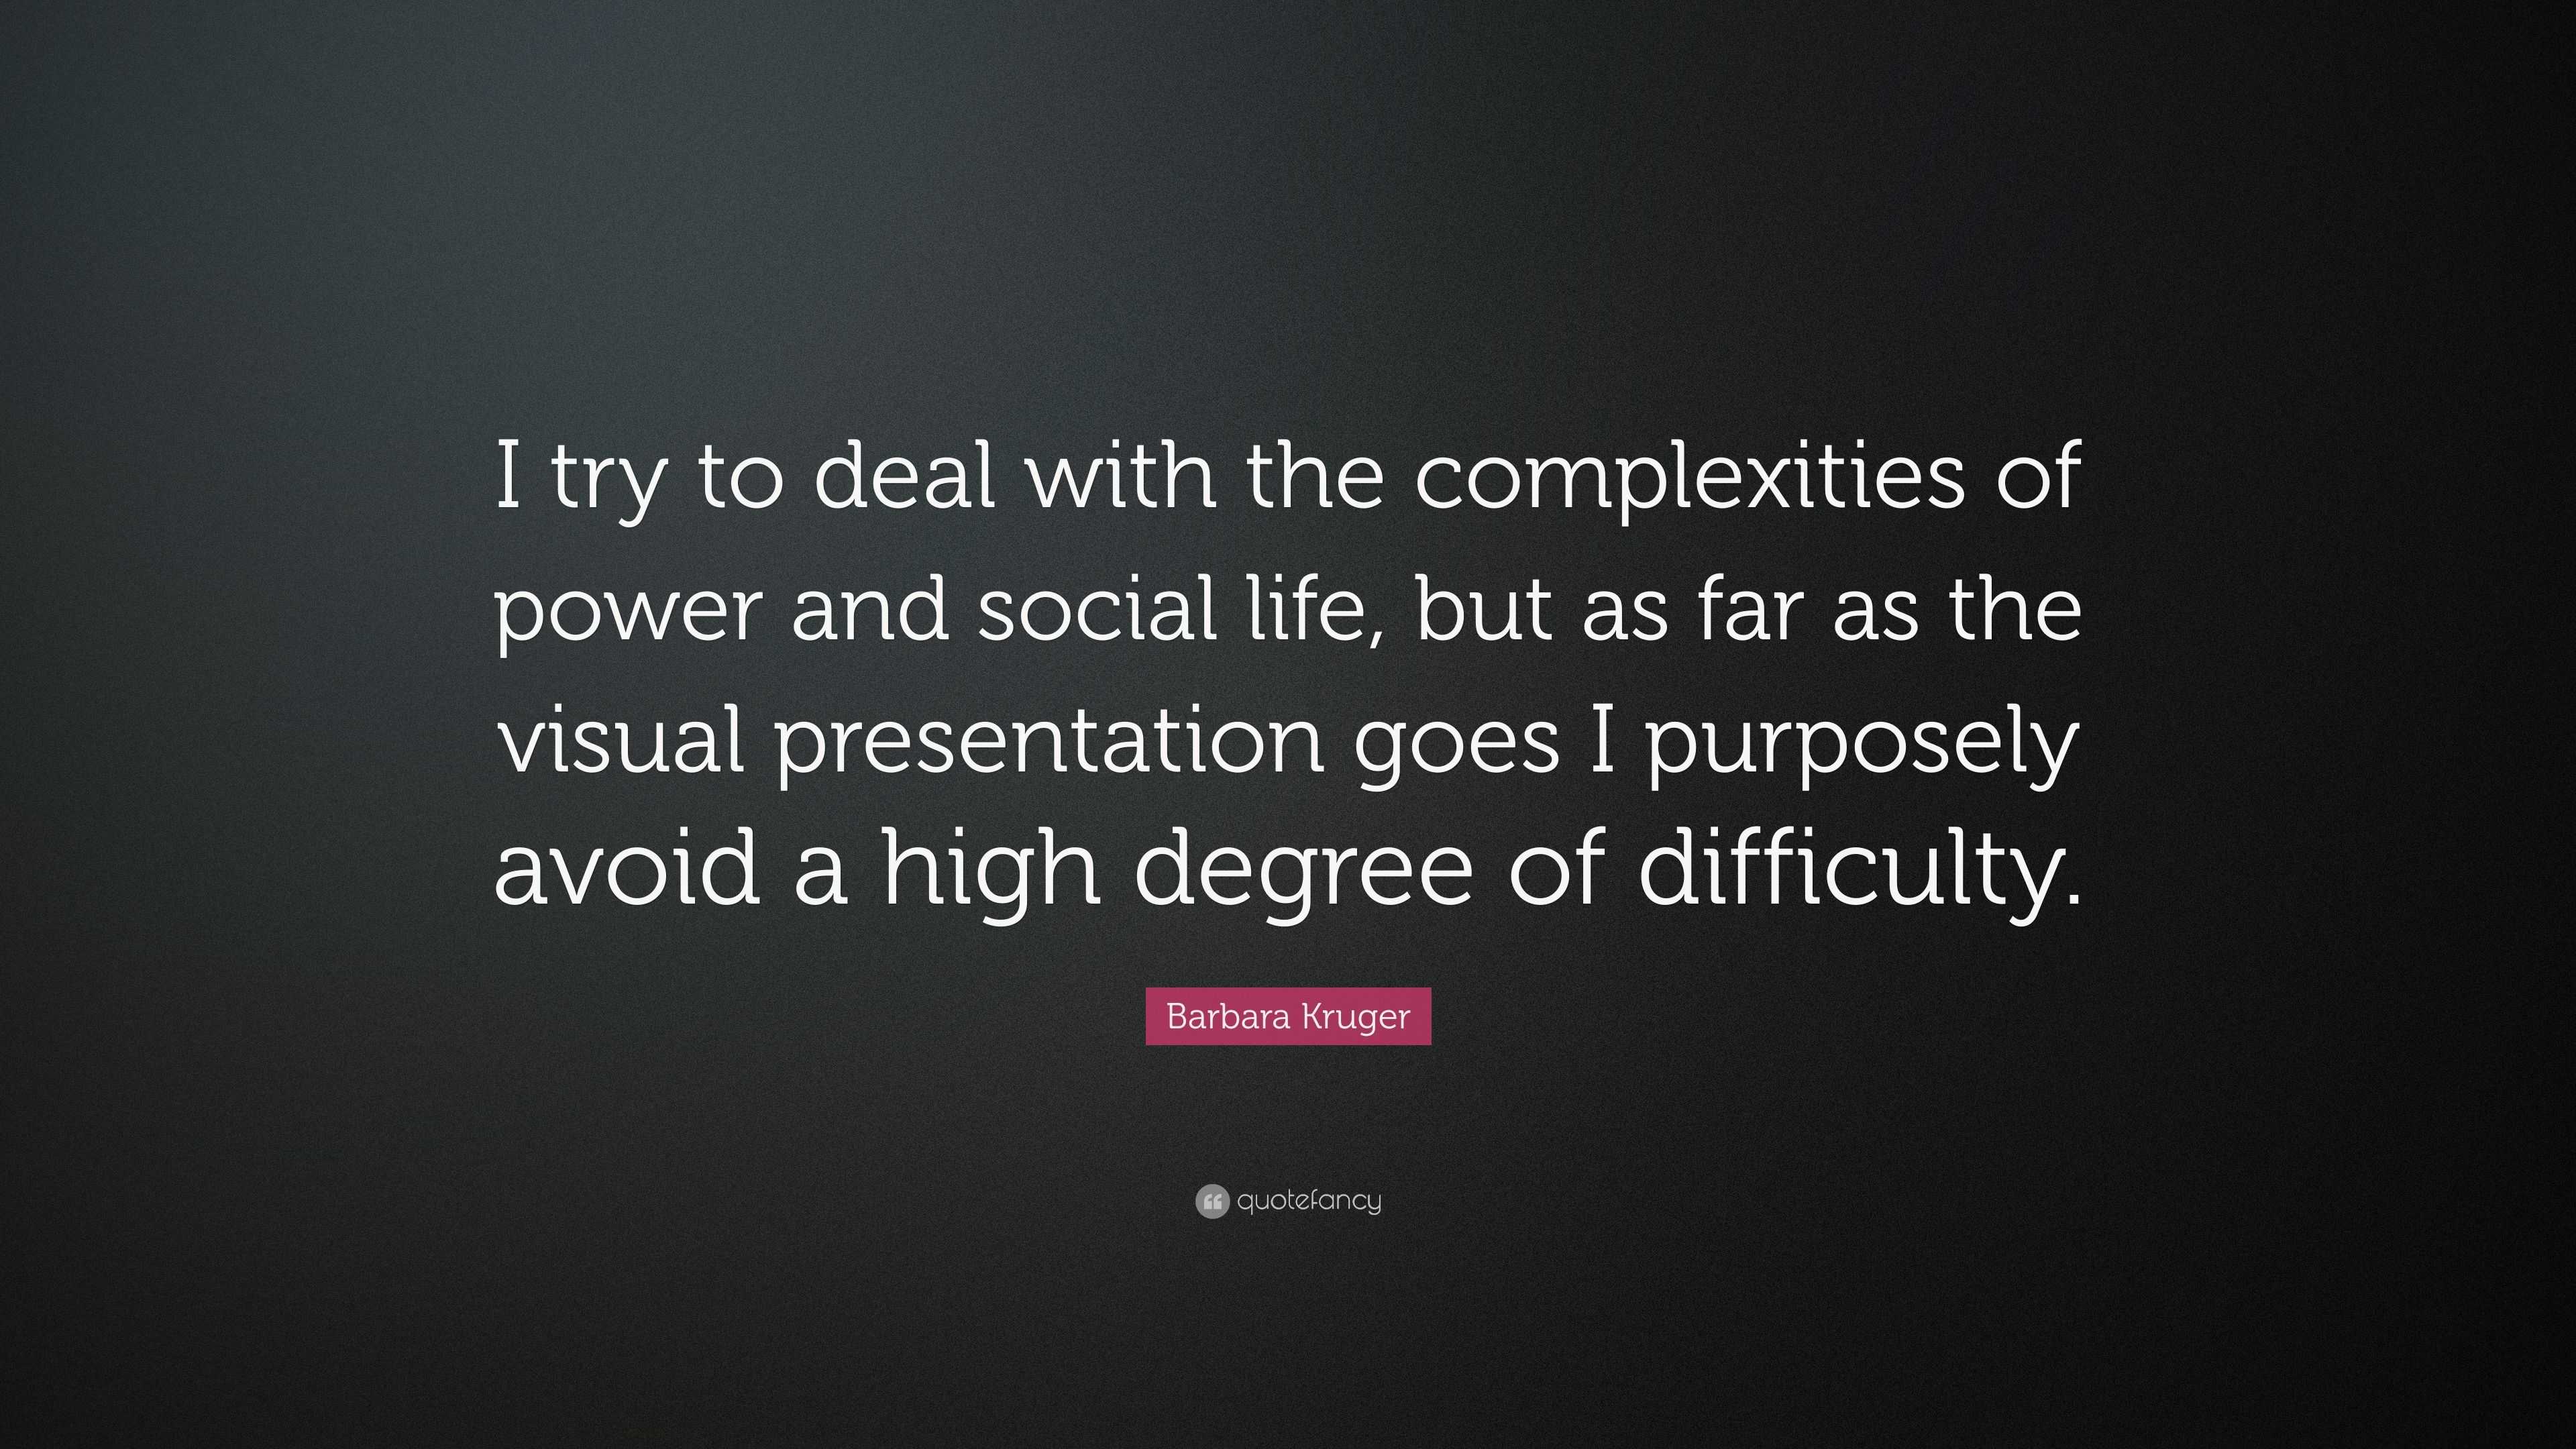 Barbara Kruger Quote: “I try to deal with the complexities of power and ...